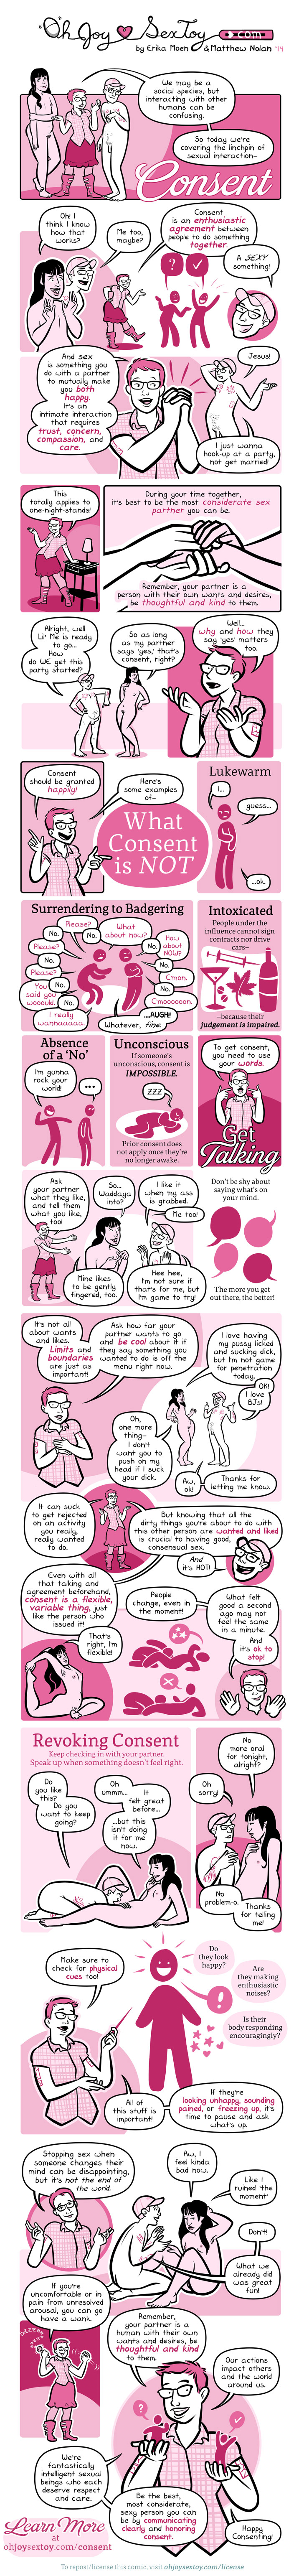 a comic about consent